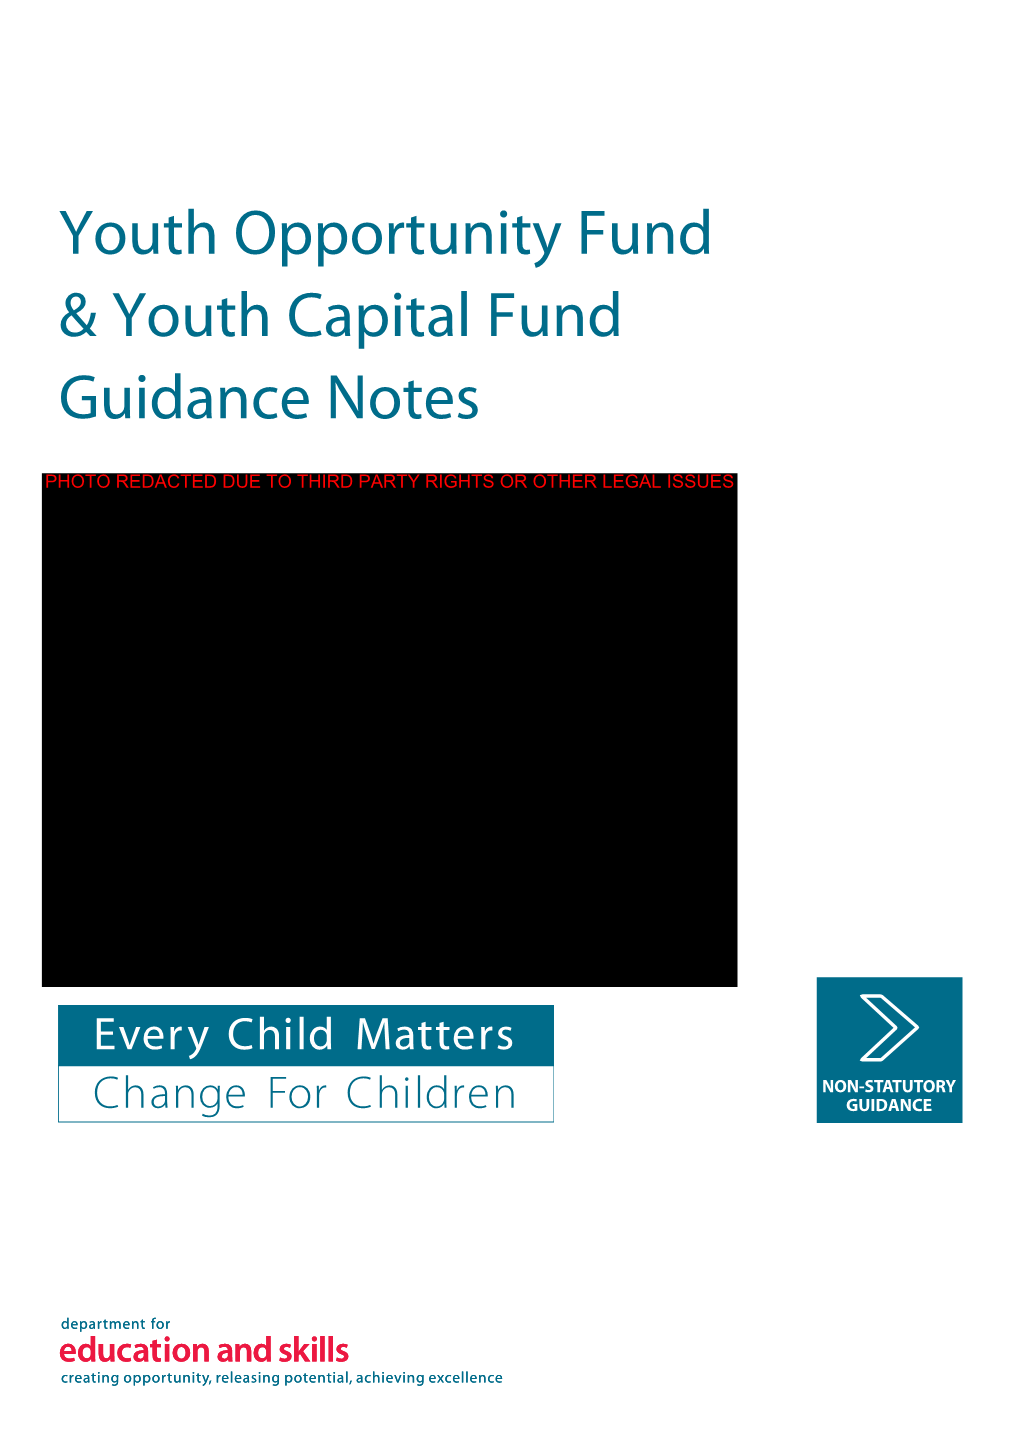 Youth Opportunity Fund & Youth Capital Fund Guidance Notes